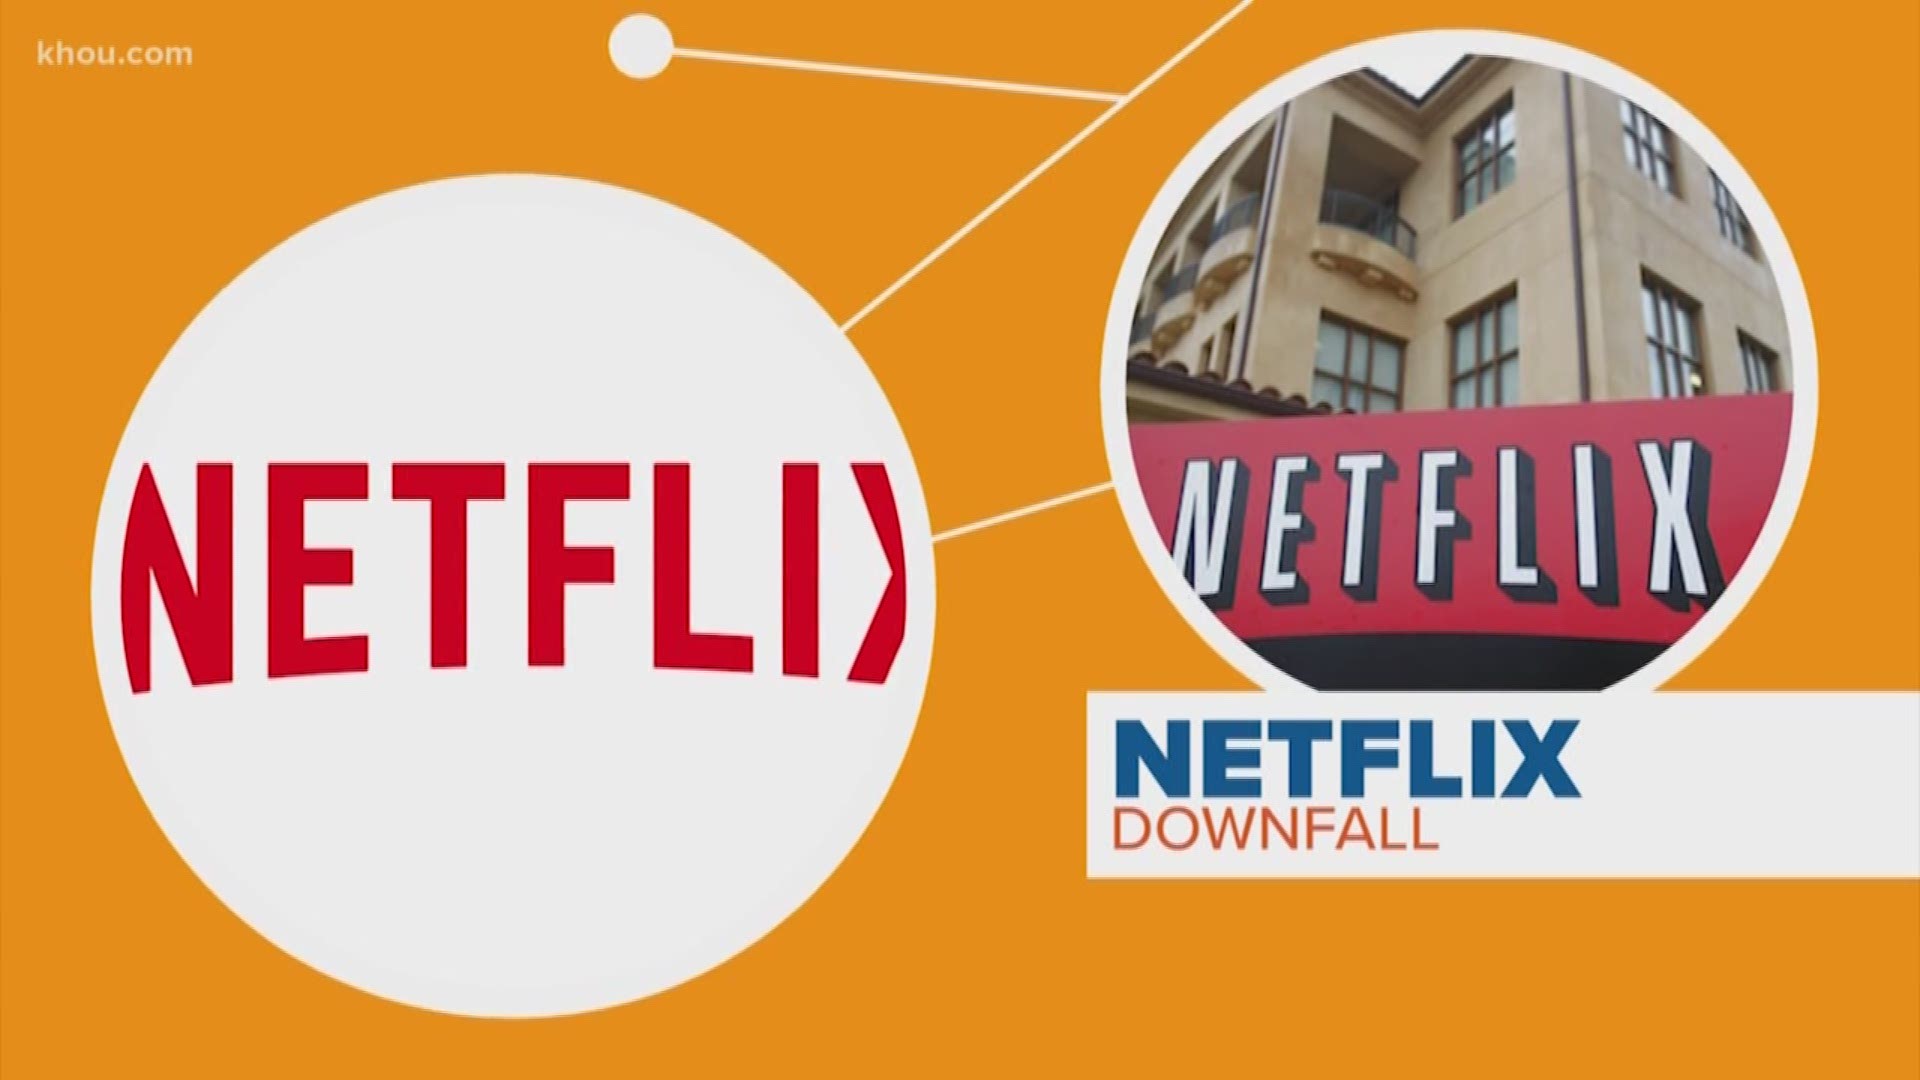 Despite success from its original shows and movies, could Netflix’s streaming superiority be in danger? Janelle Bludau connects the dots.